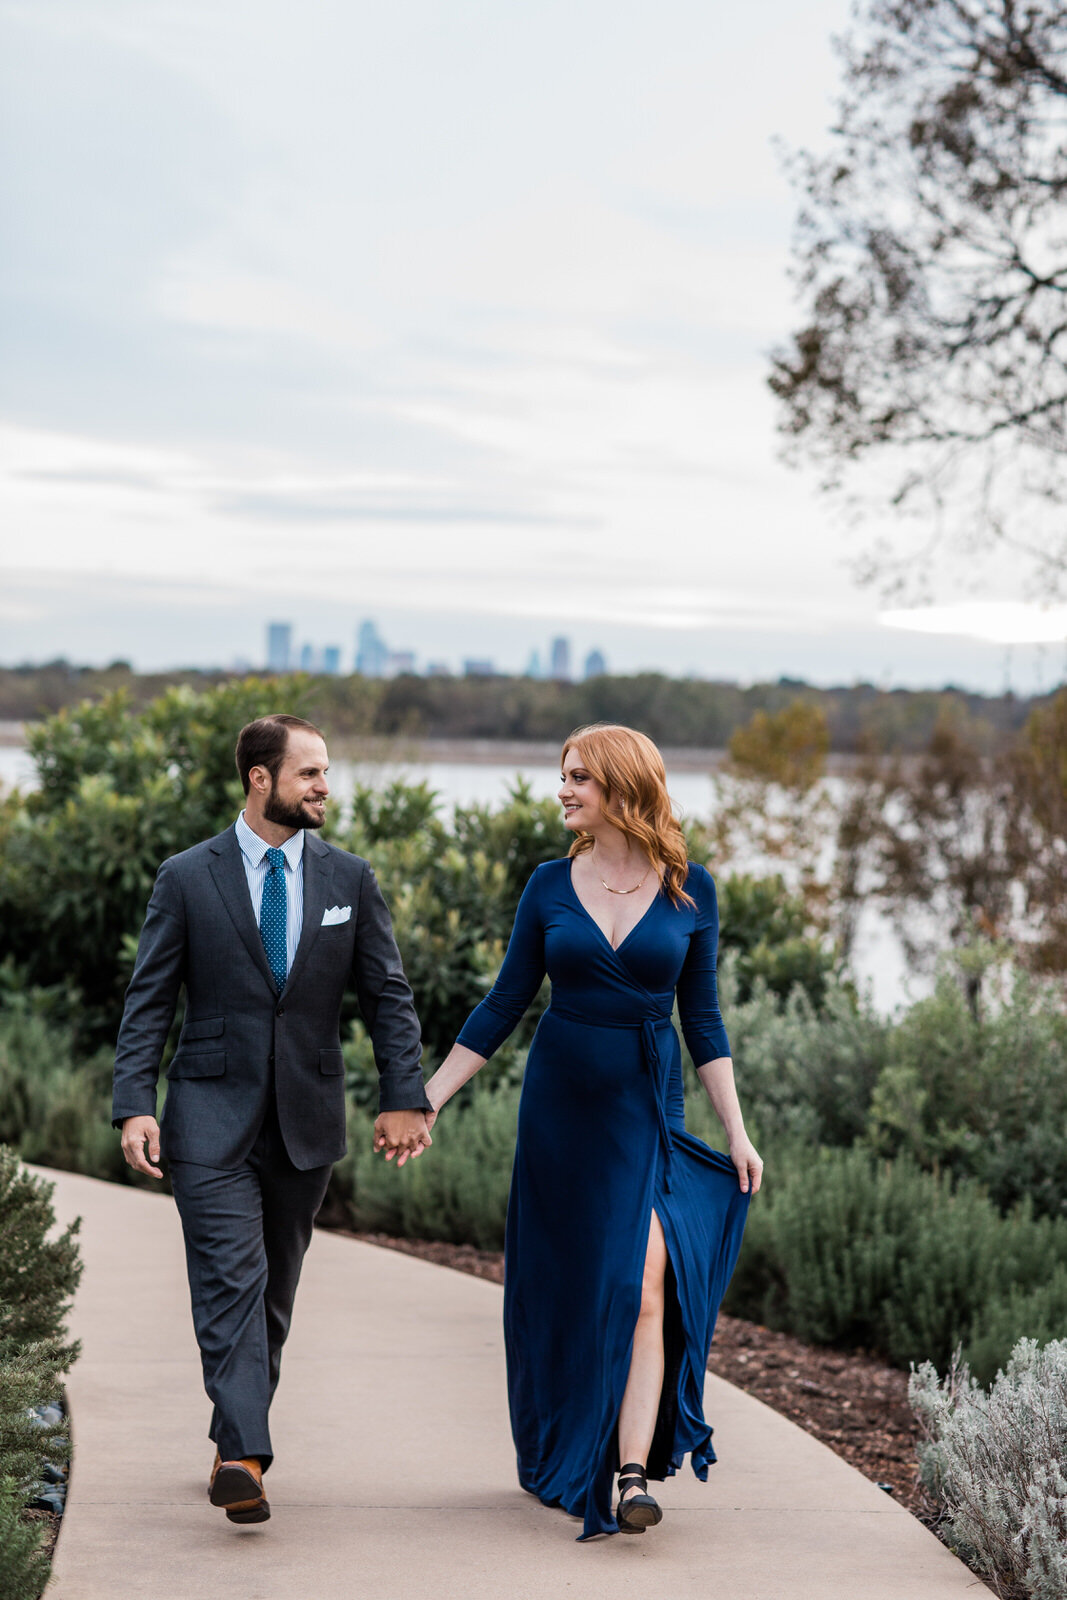 Amanda really wanted to have Dallas in the background and this location was perfect!